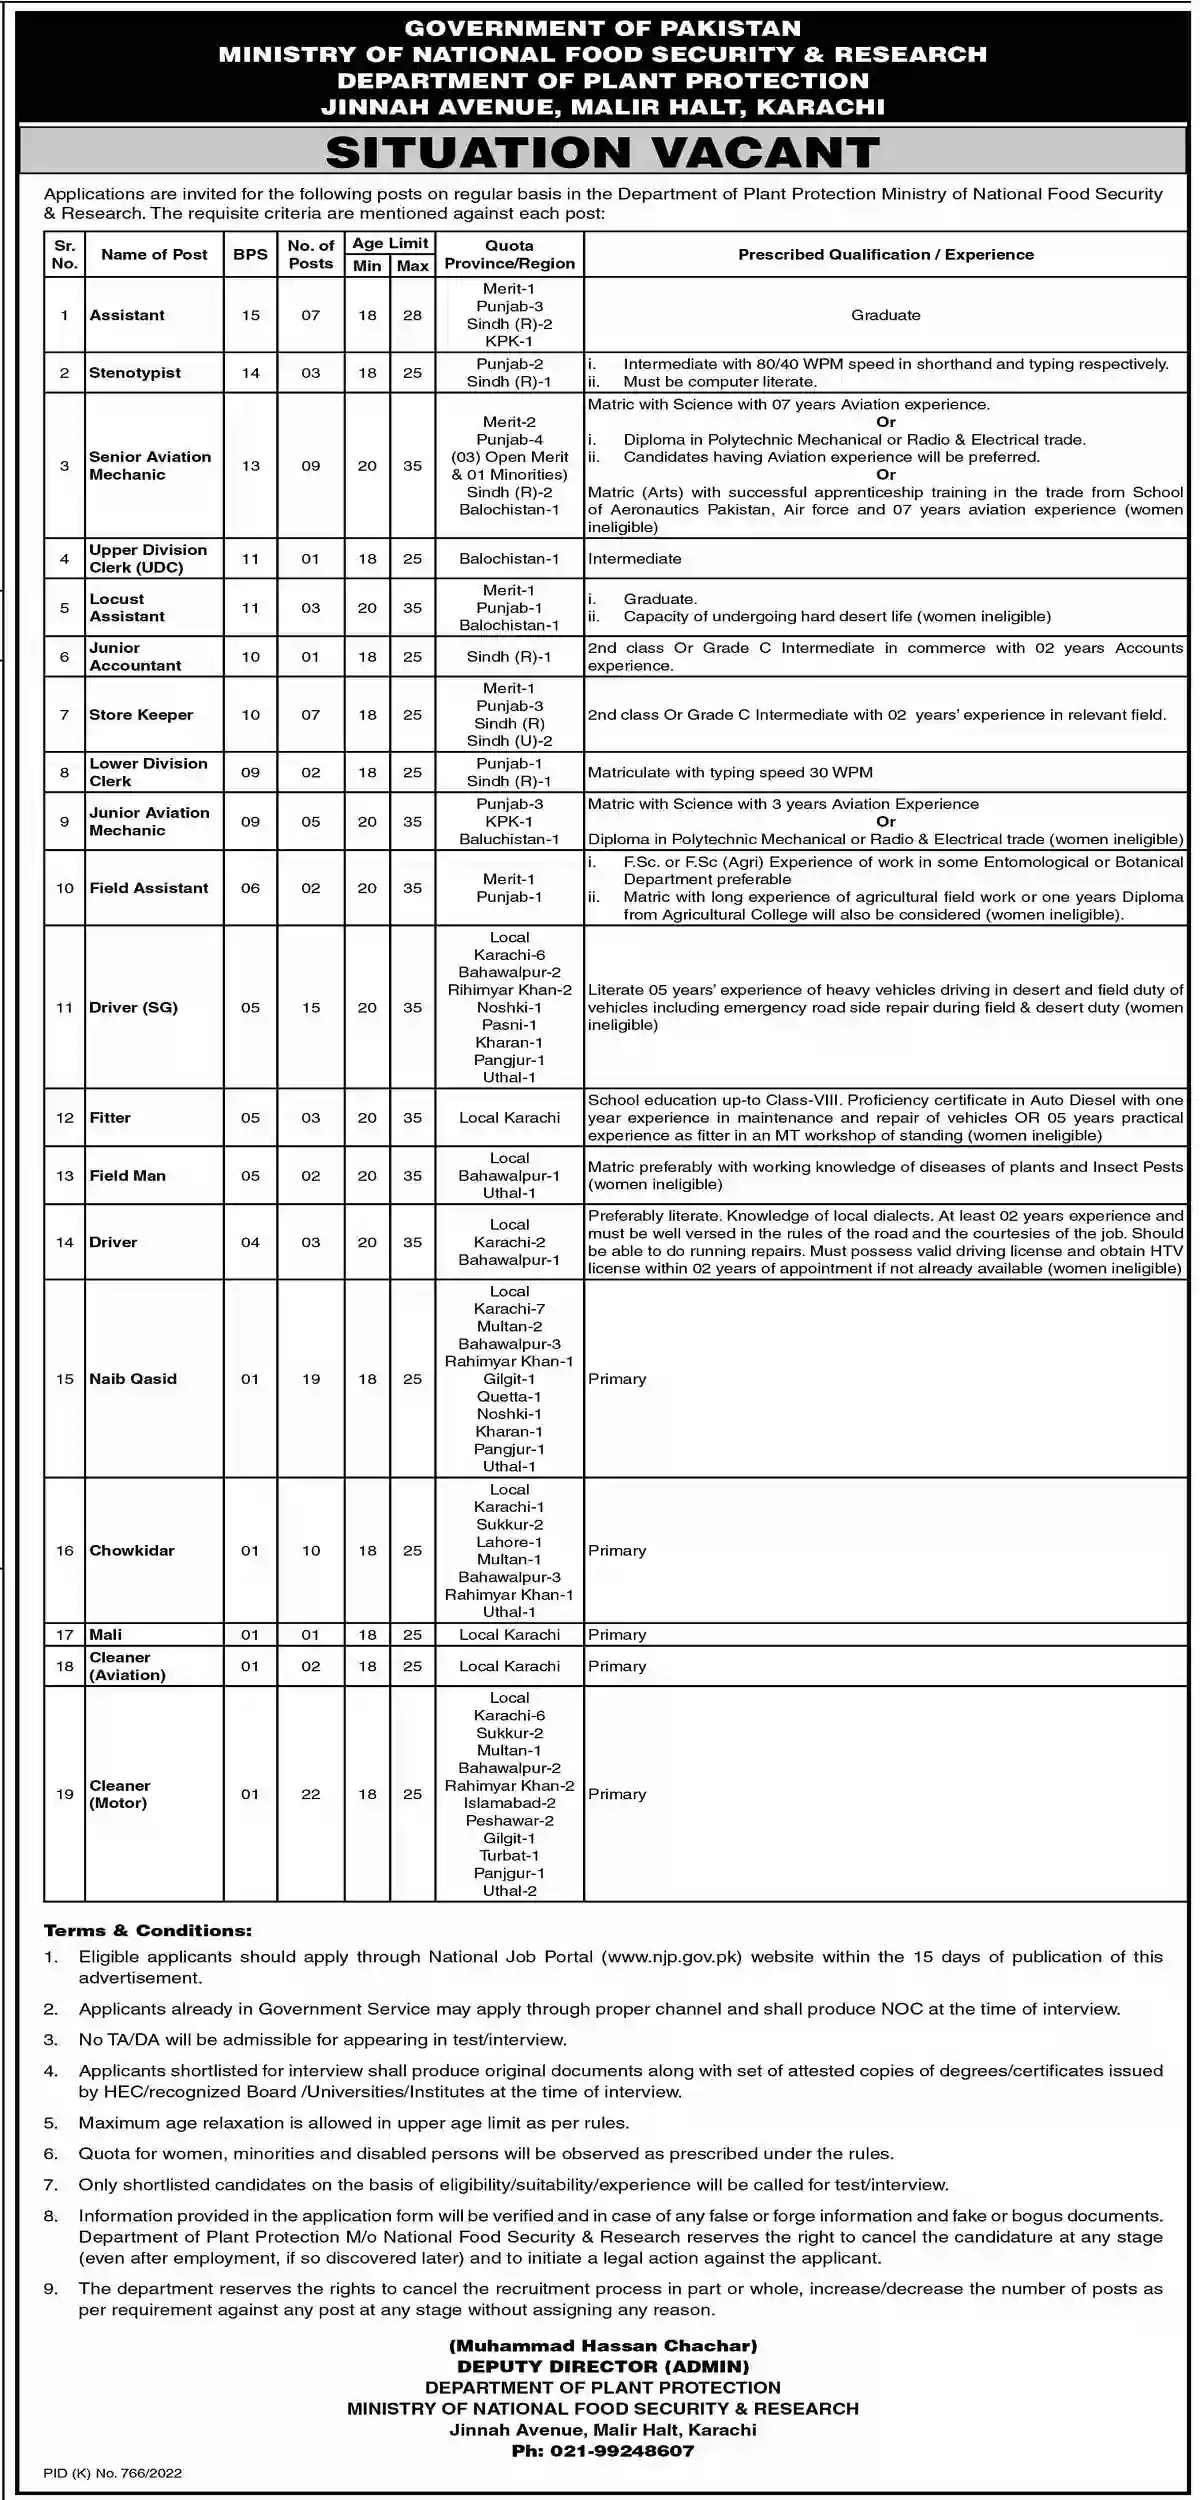 Ministry of National Food Security & Research MNFSR Jobs 2022 Apply Online